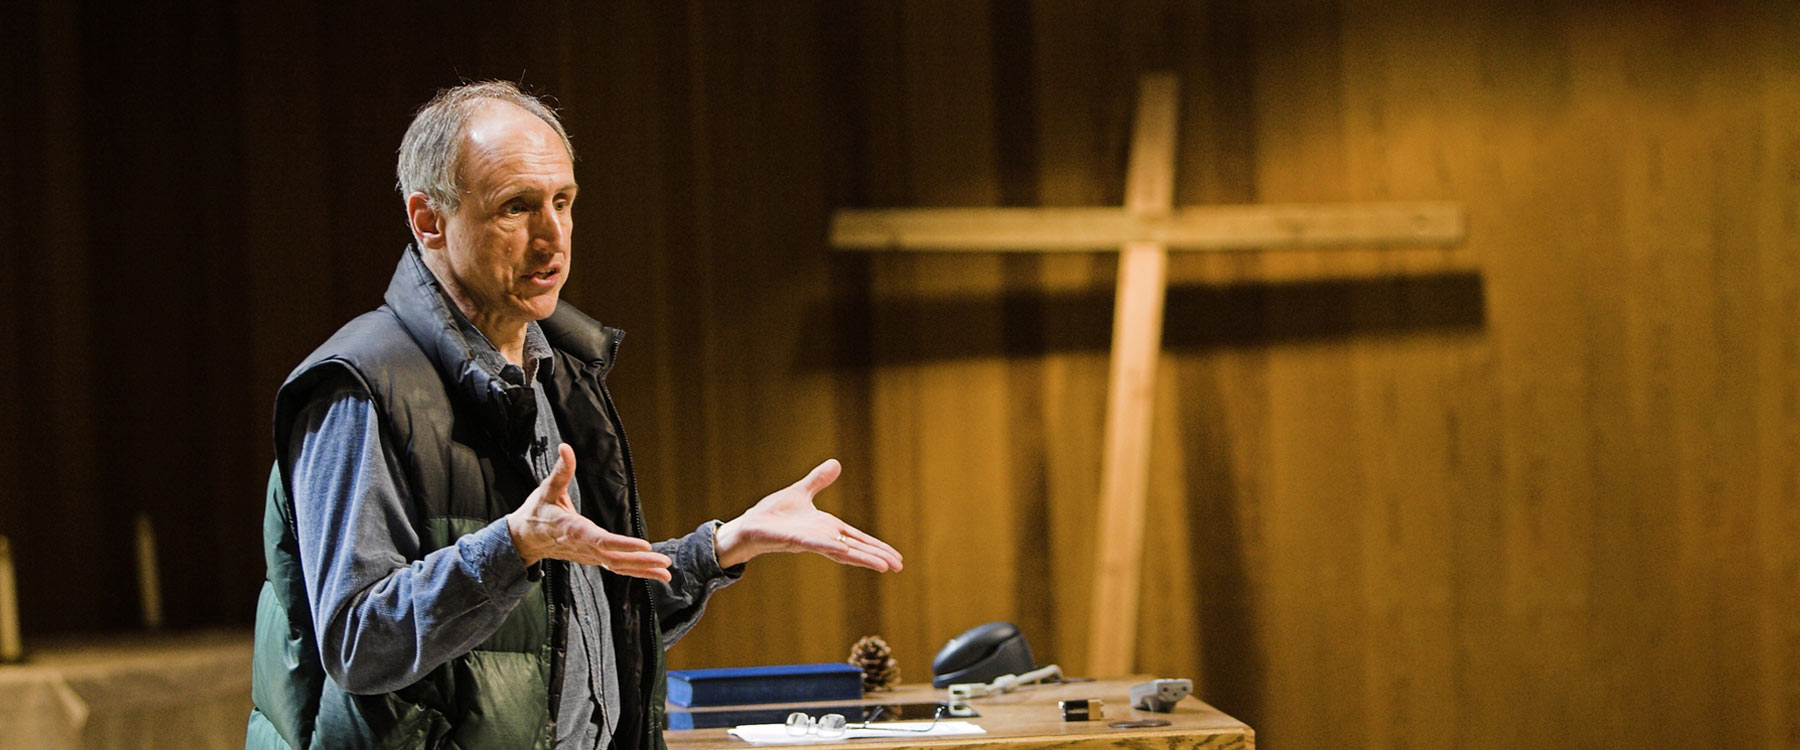 A professor gestures with outstretched hands during a theology lecture in the chapel.